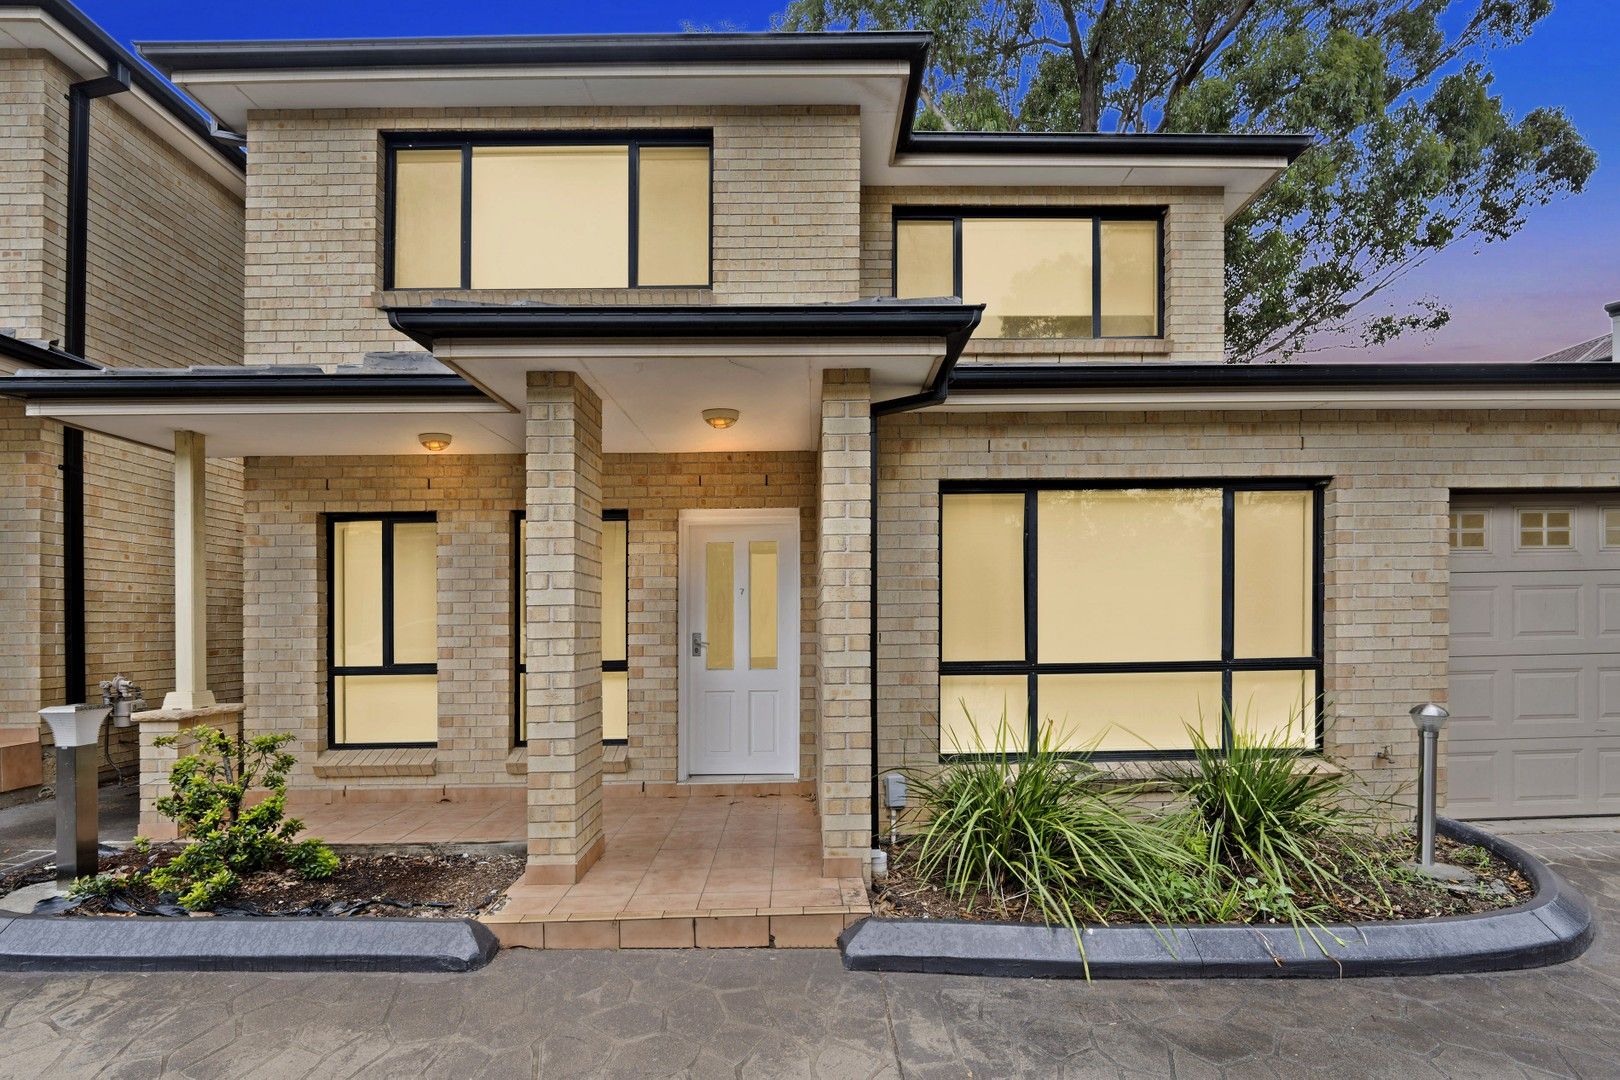 Townhouse in 105 Bellevue Avenue, GEORGES HALL NSW, 2198